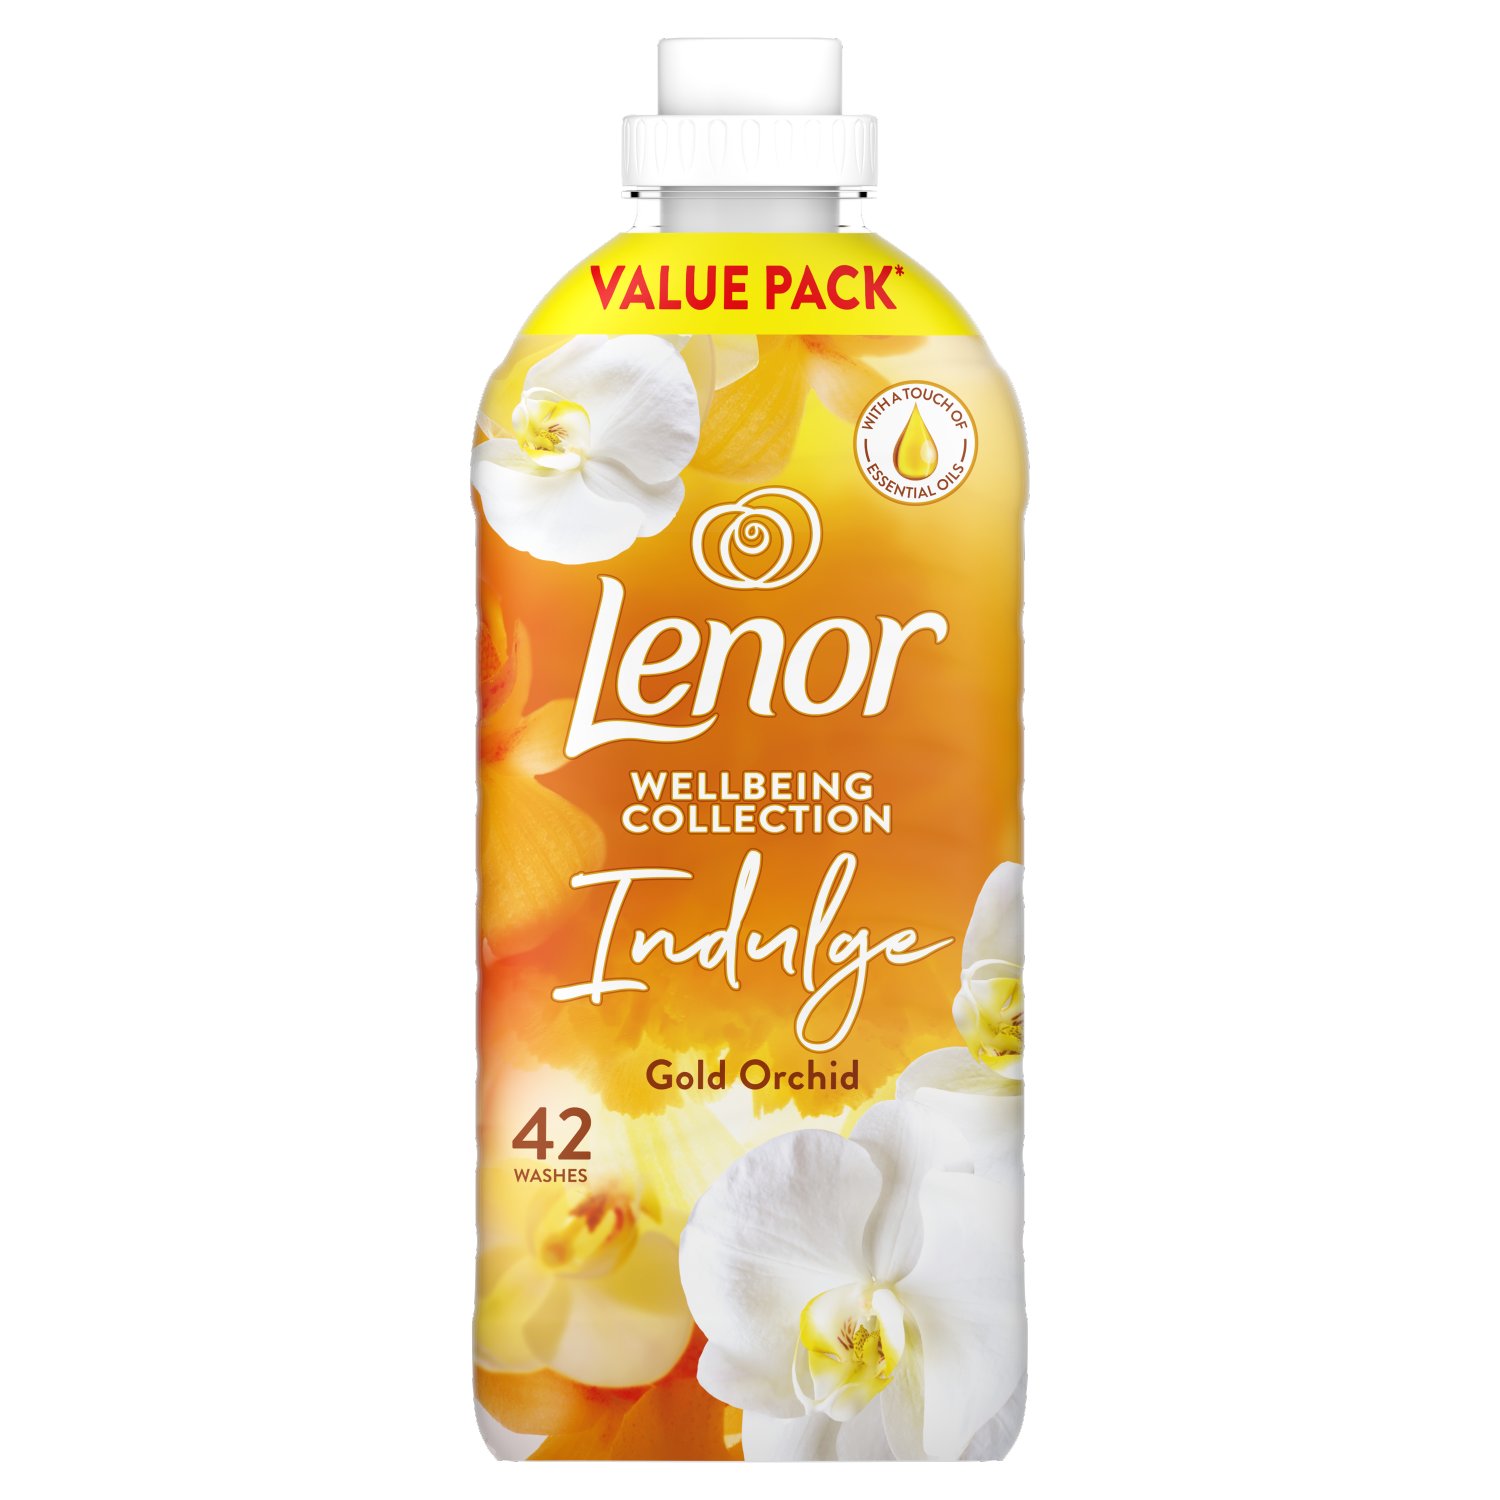 Lenor Gold Orchid Fabric Conditioner 42 Wash Value Pack (1.3 L)